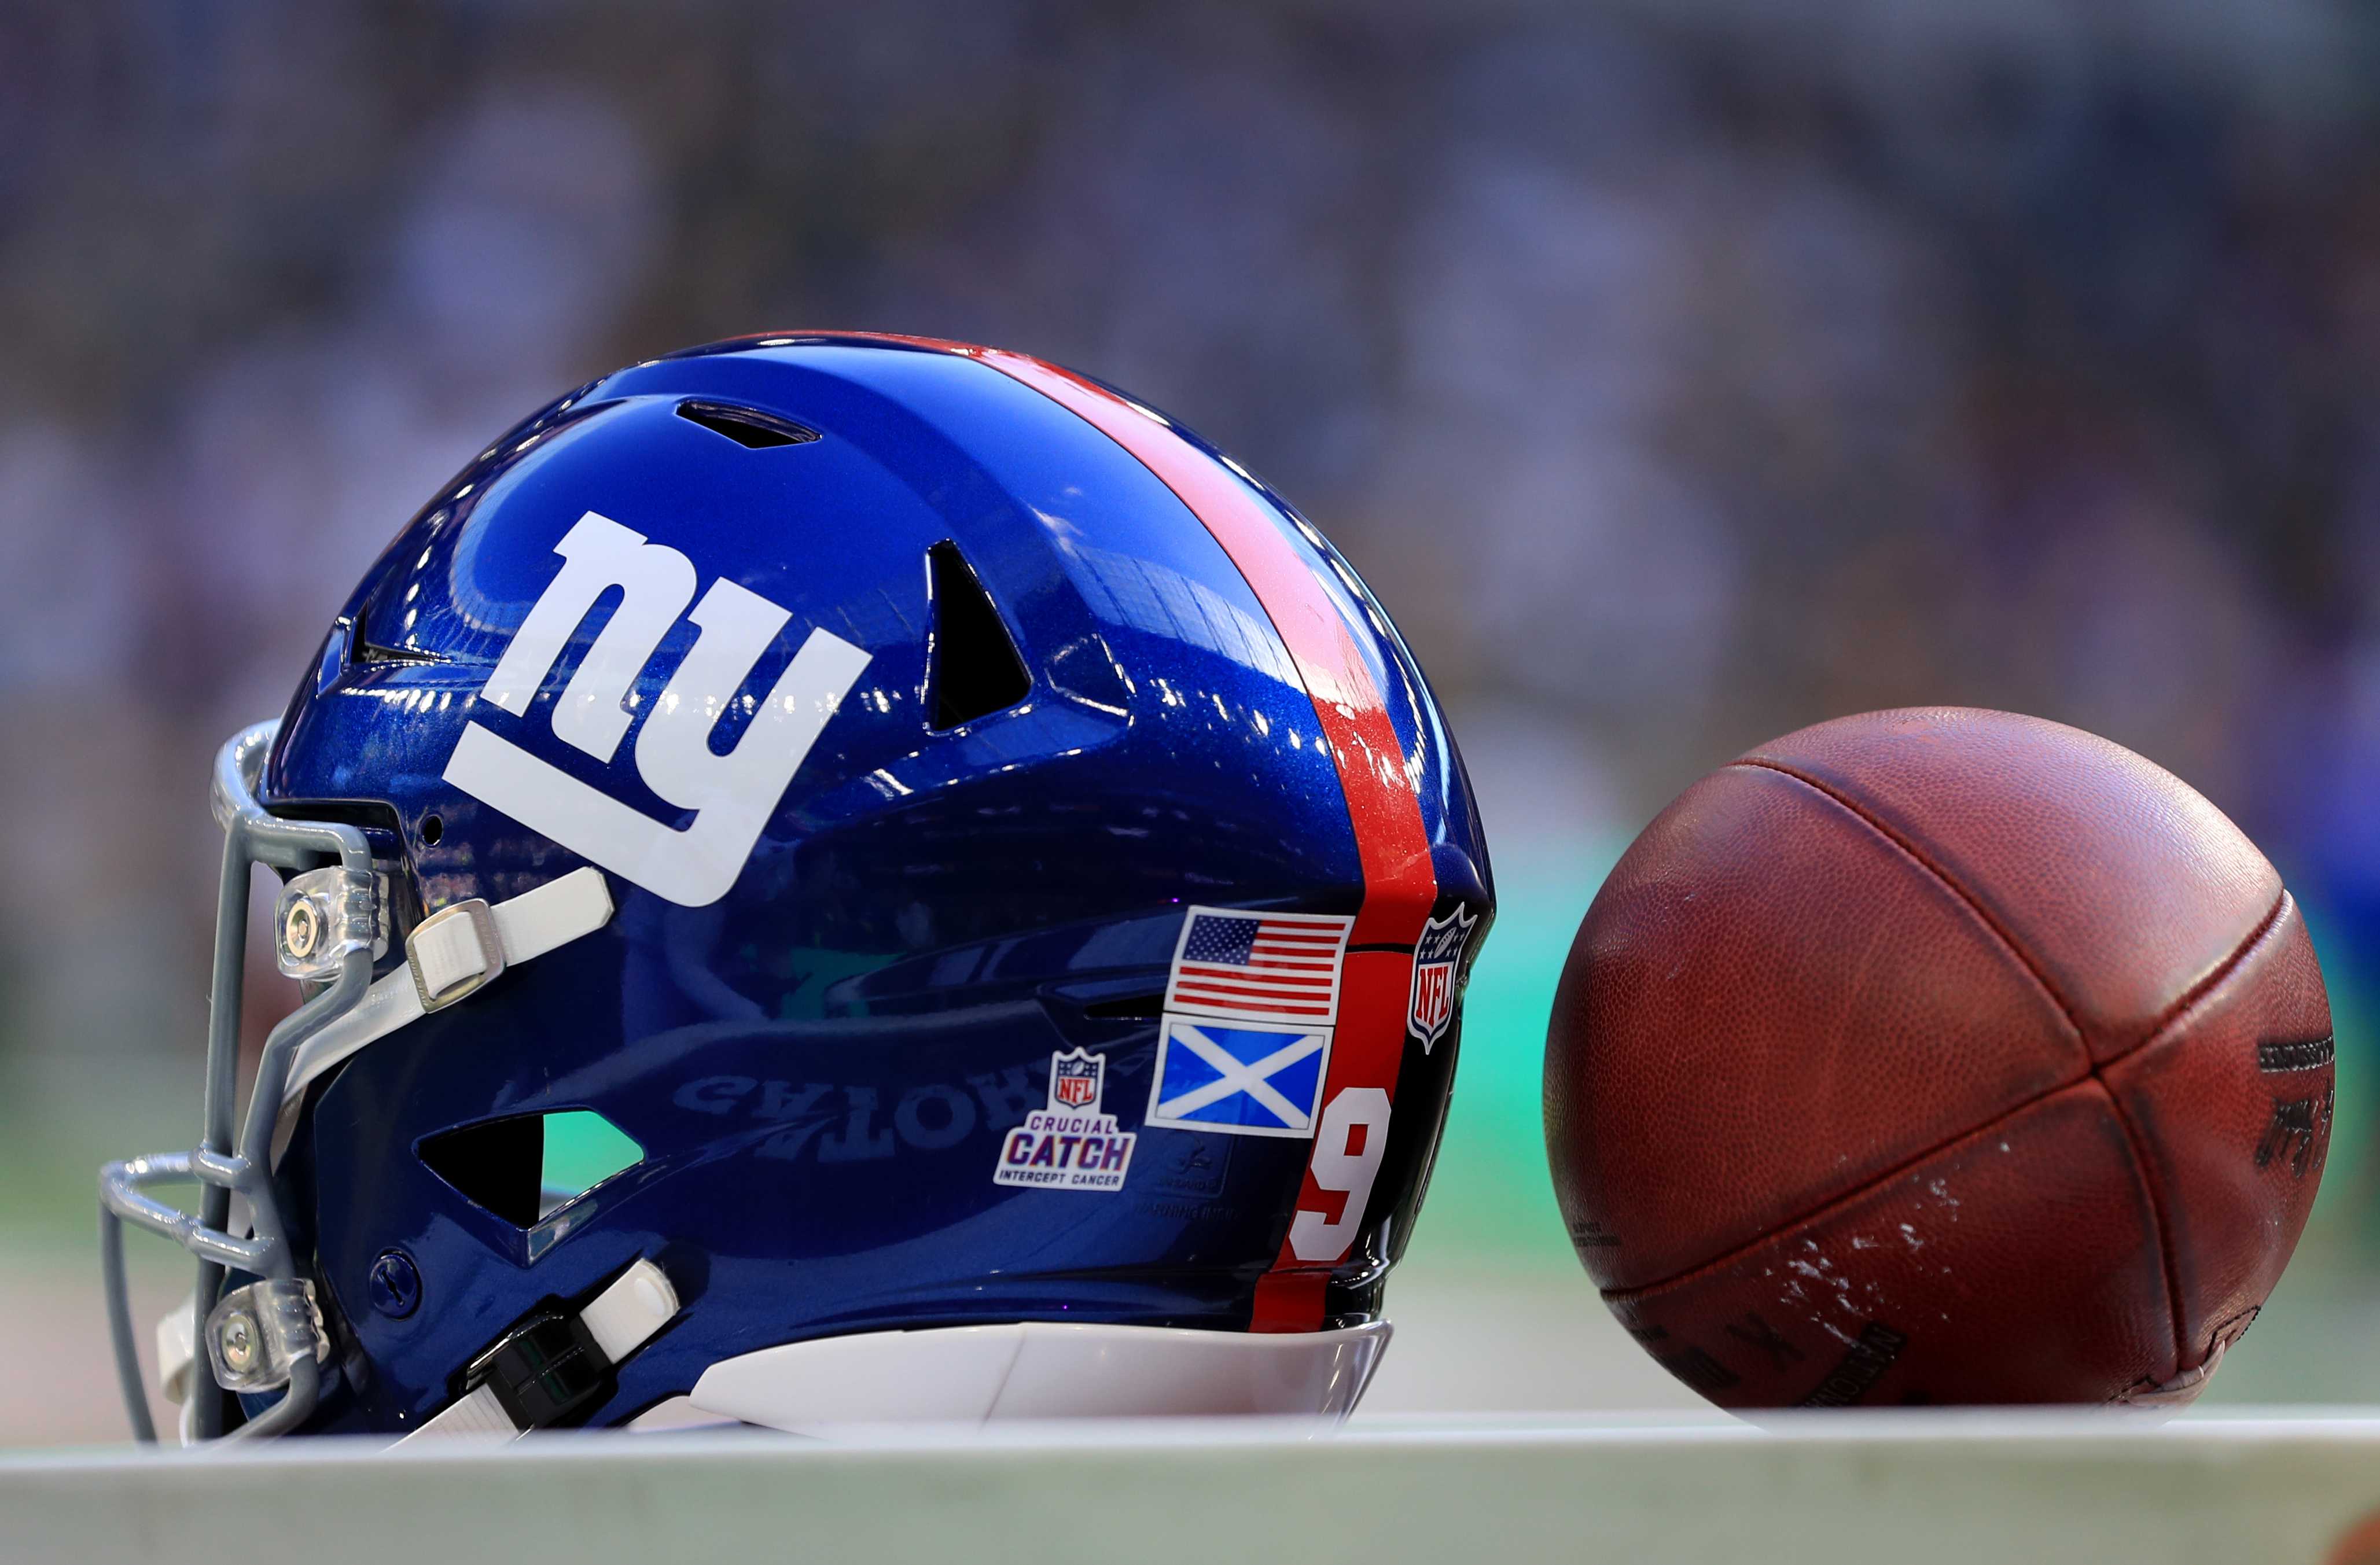 new york giants game today live stream